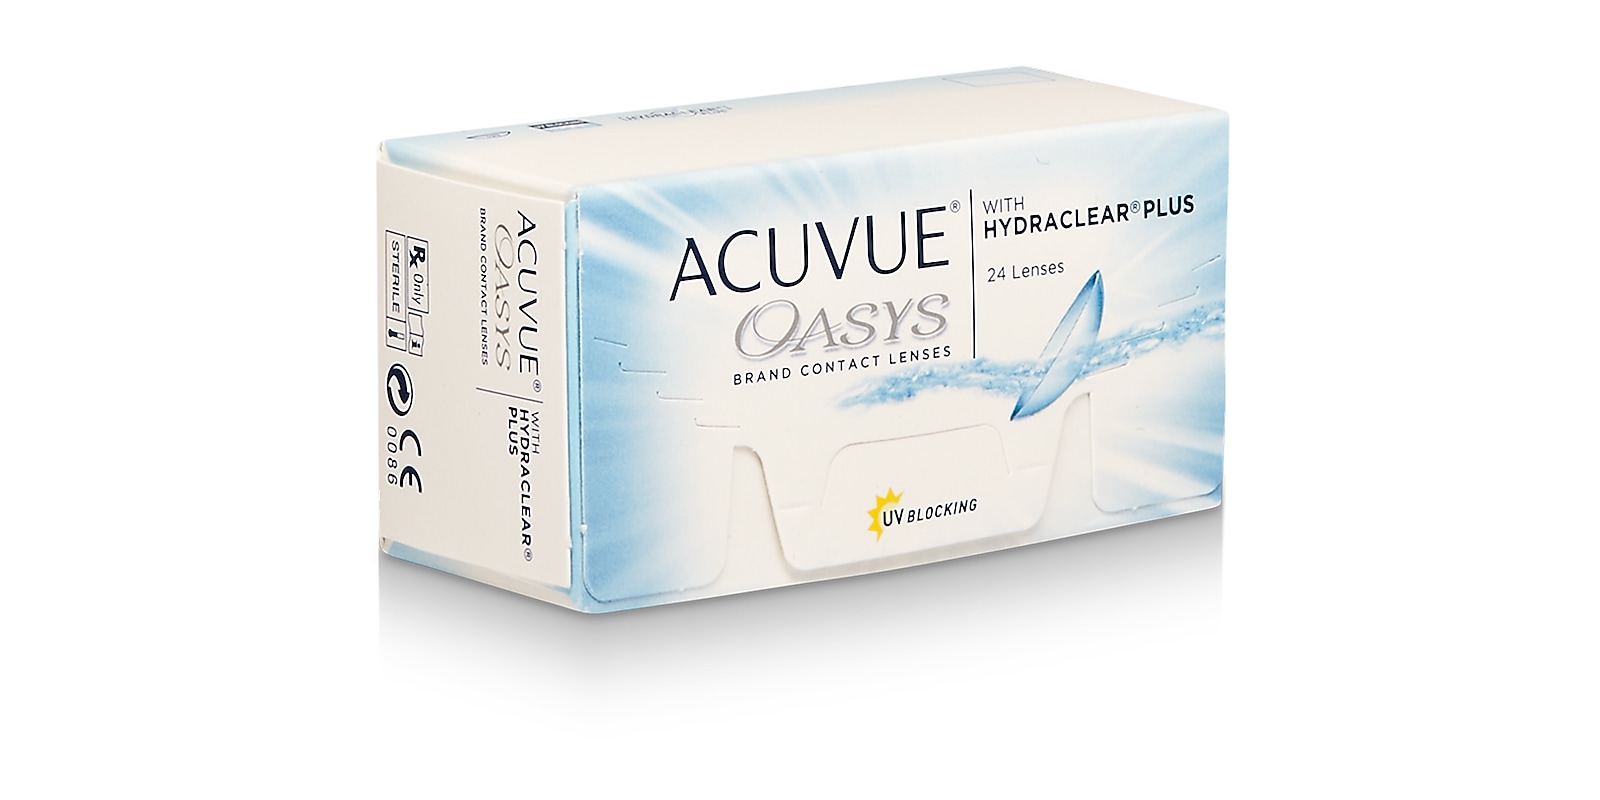 Acuvue Oasys® with Hydraclear® Plus Technology, 24 pack contact lenses